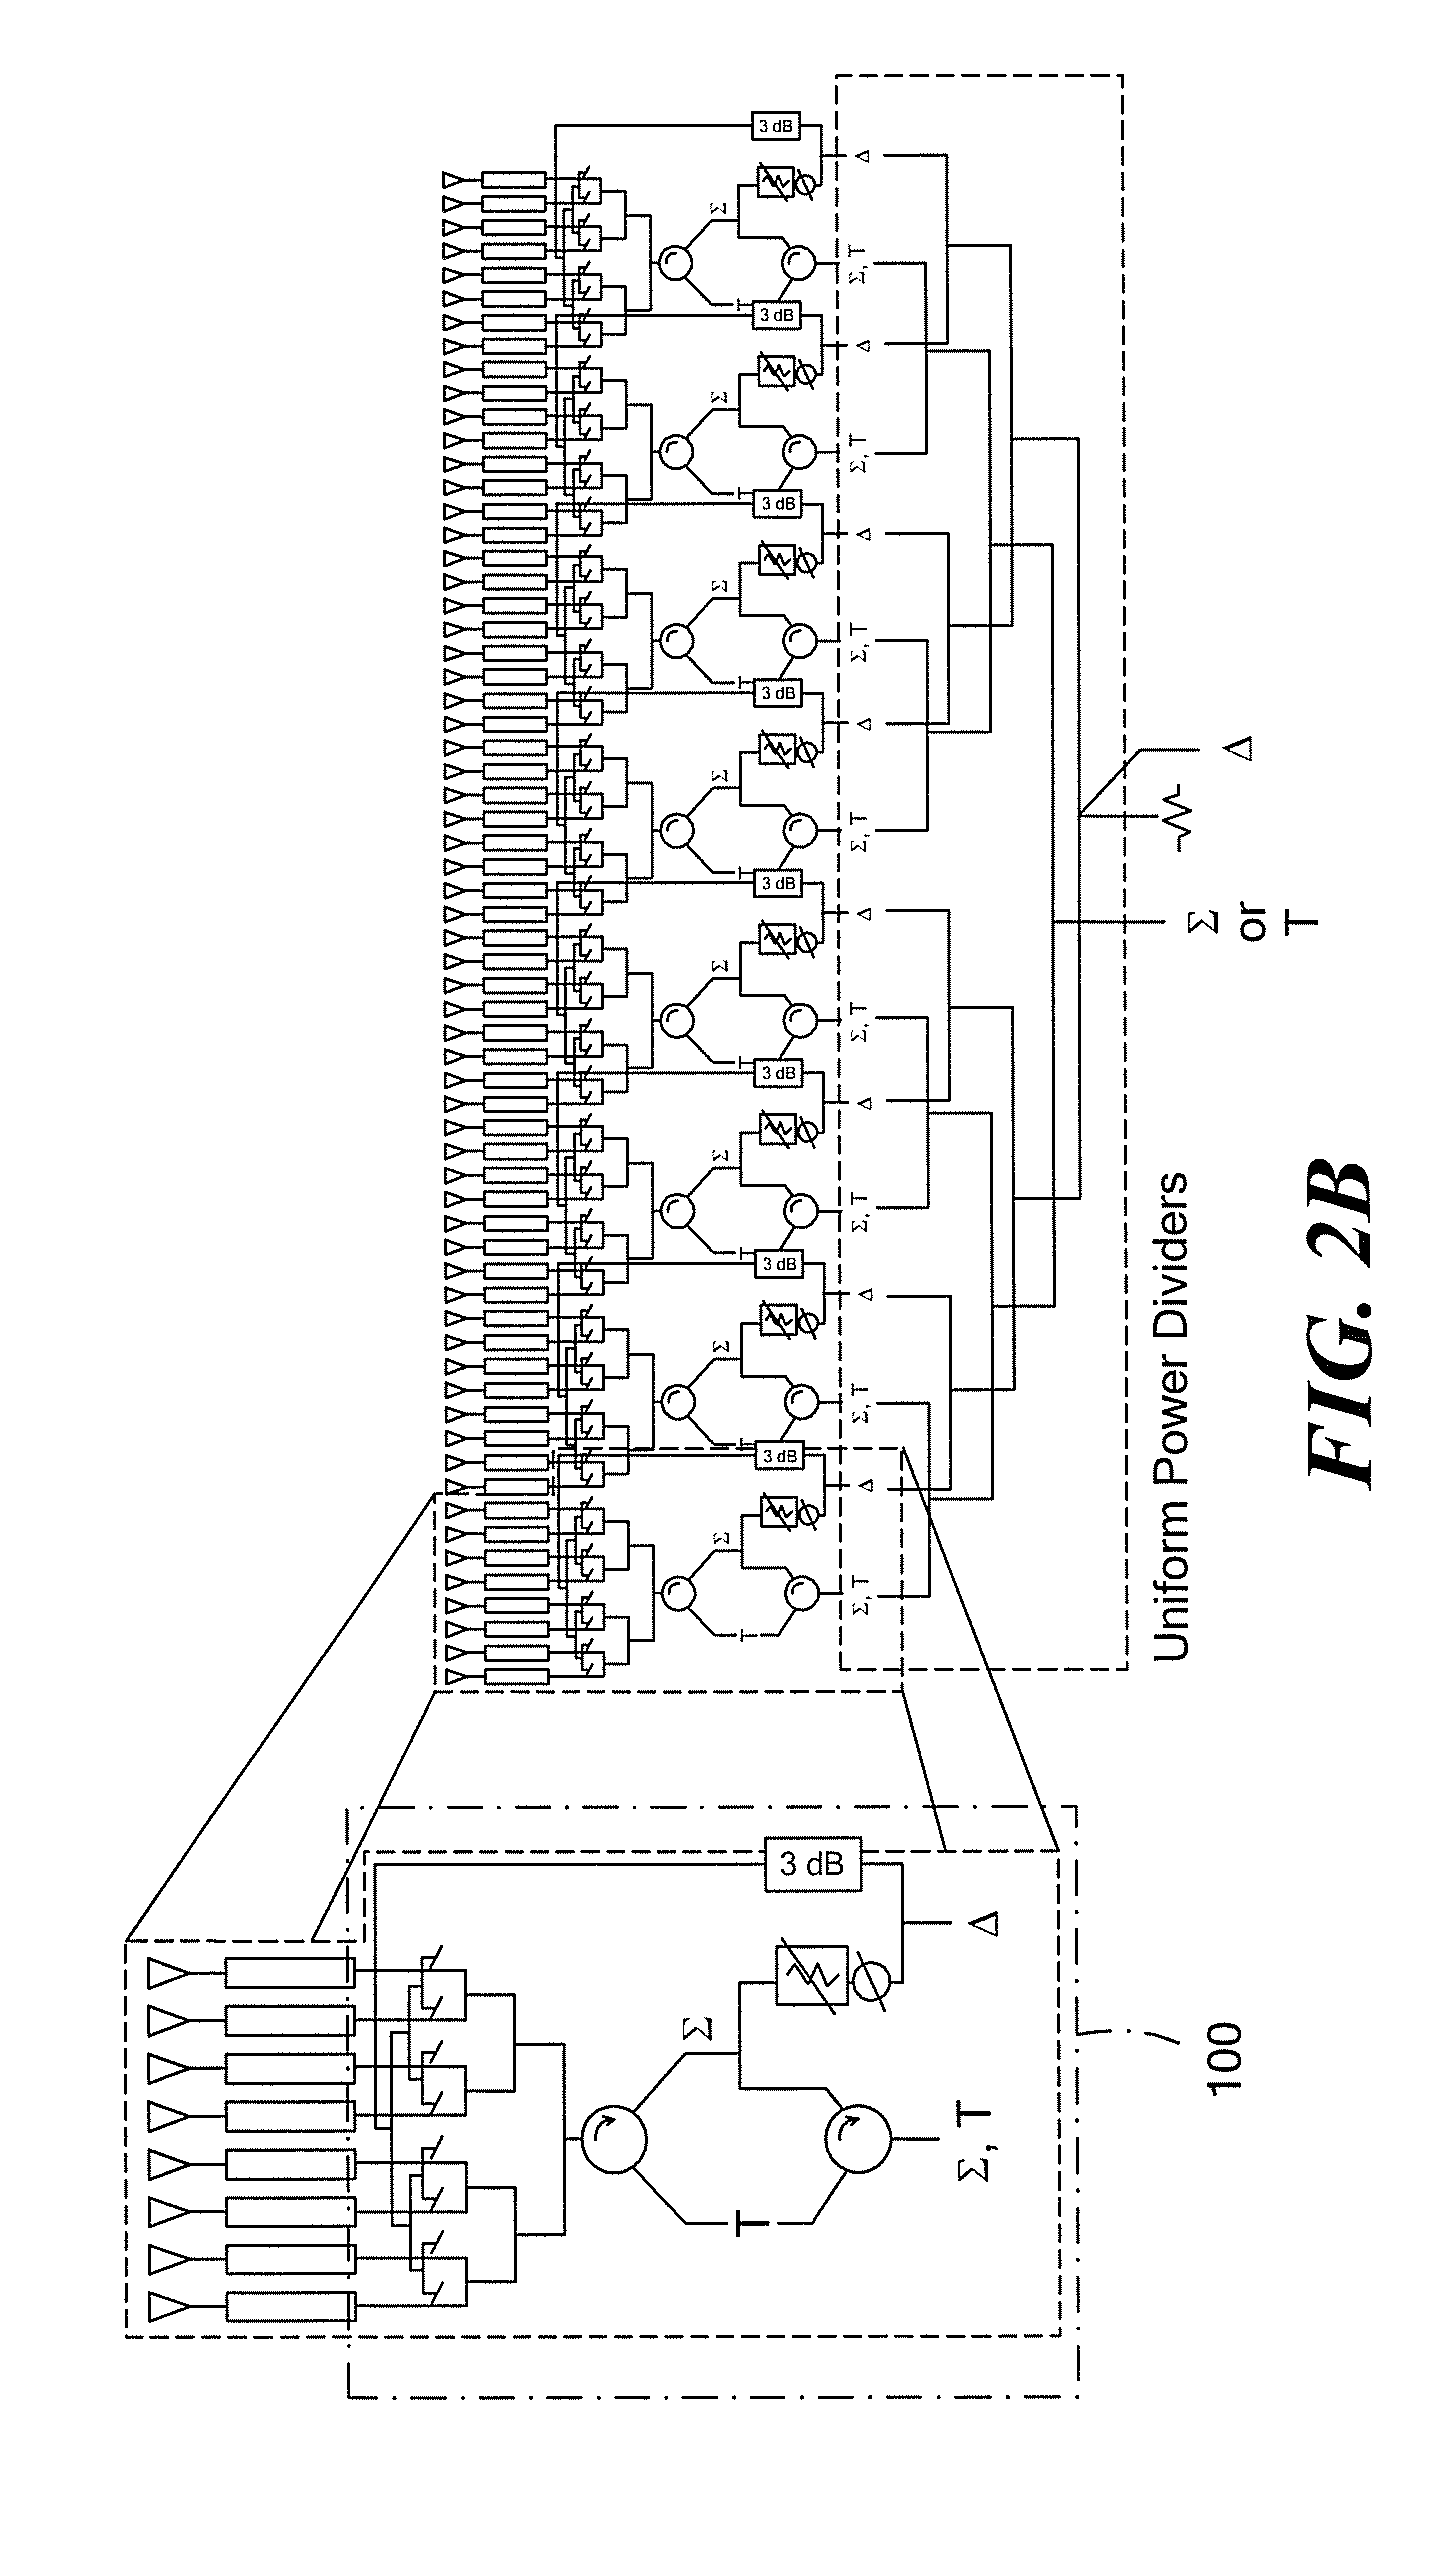 RF feed network for modular active aperture electronically steered arrays